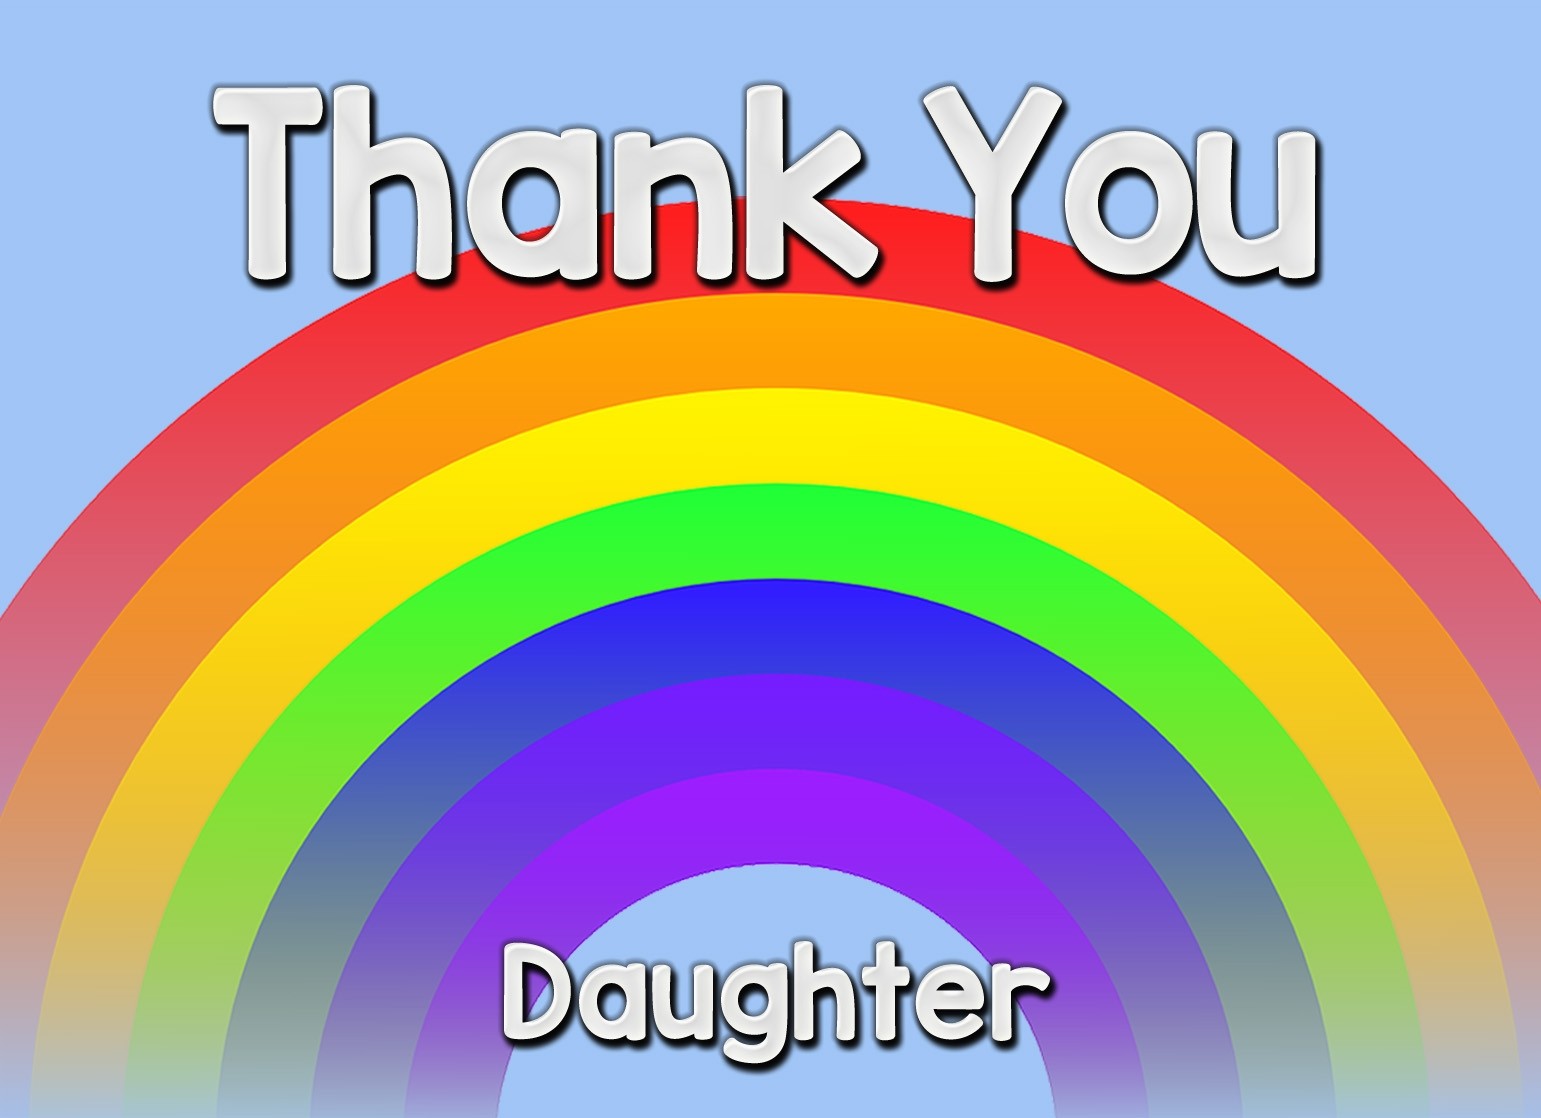 Thank You 'Daughter' Rainbow Greeting Card